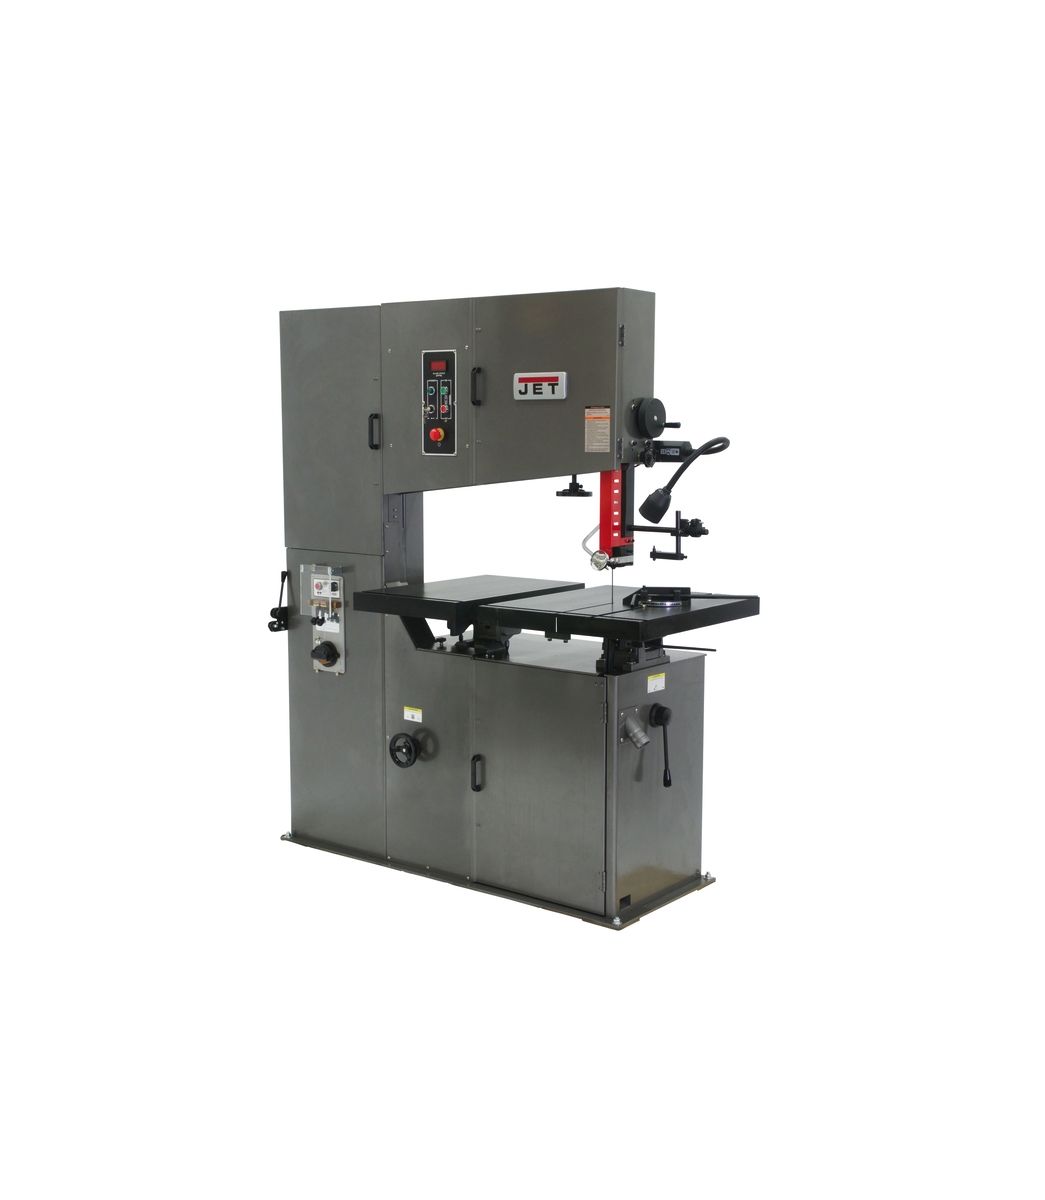 JET VBS-3612, 36" Vertical Band Saw